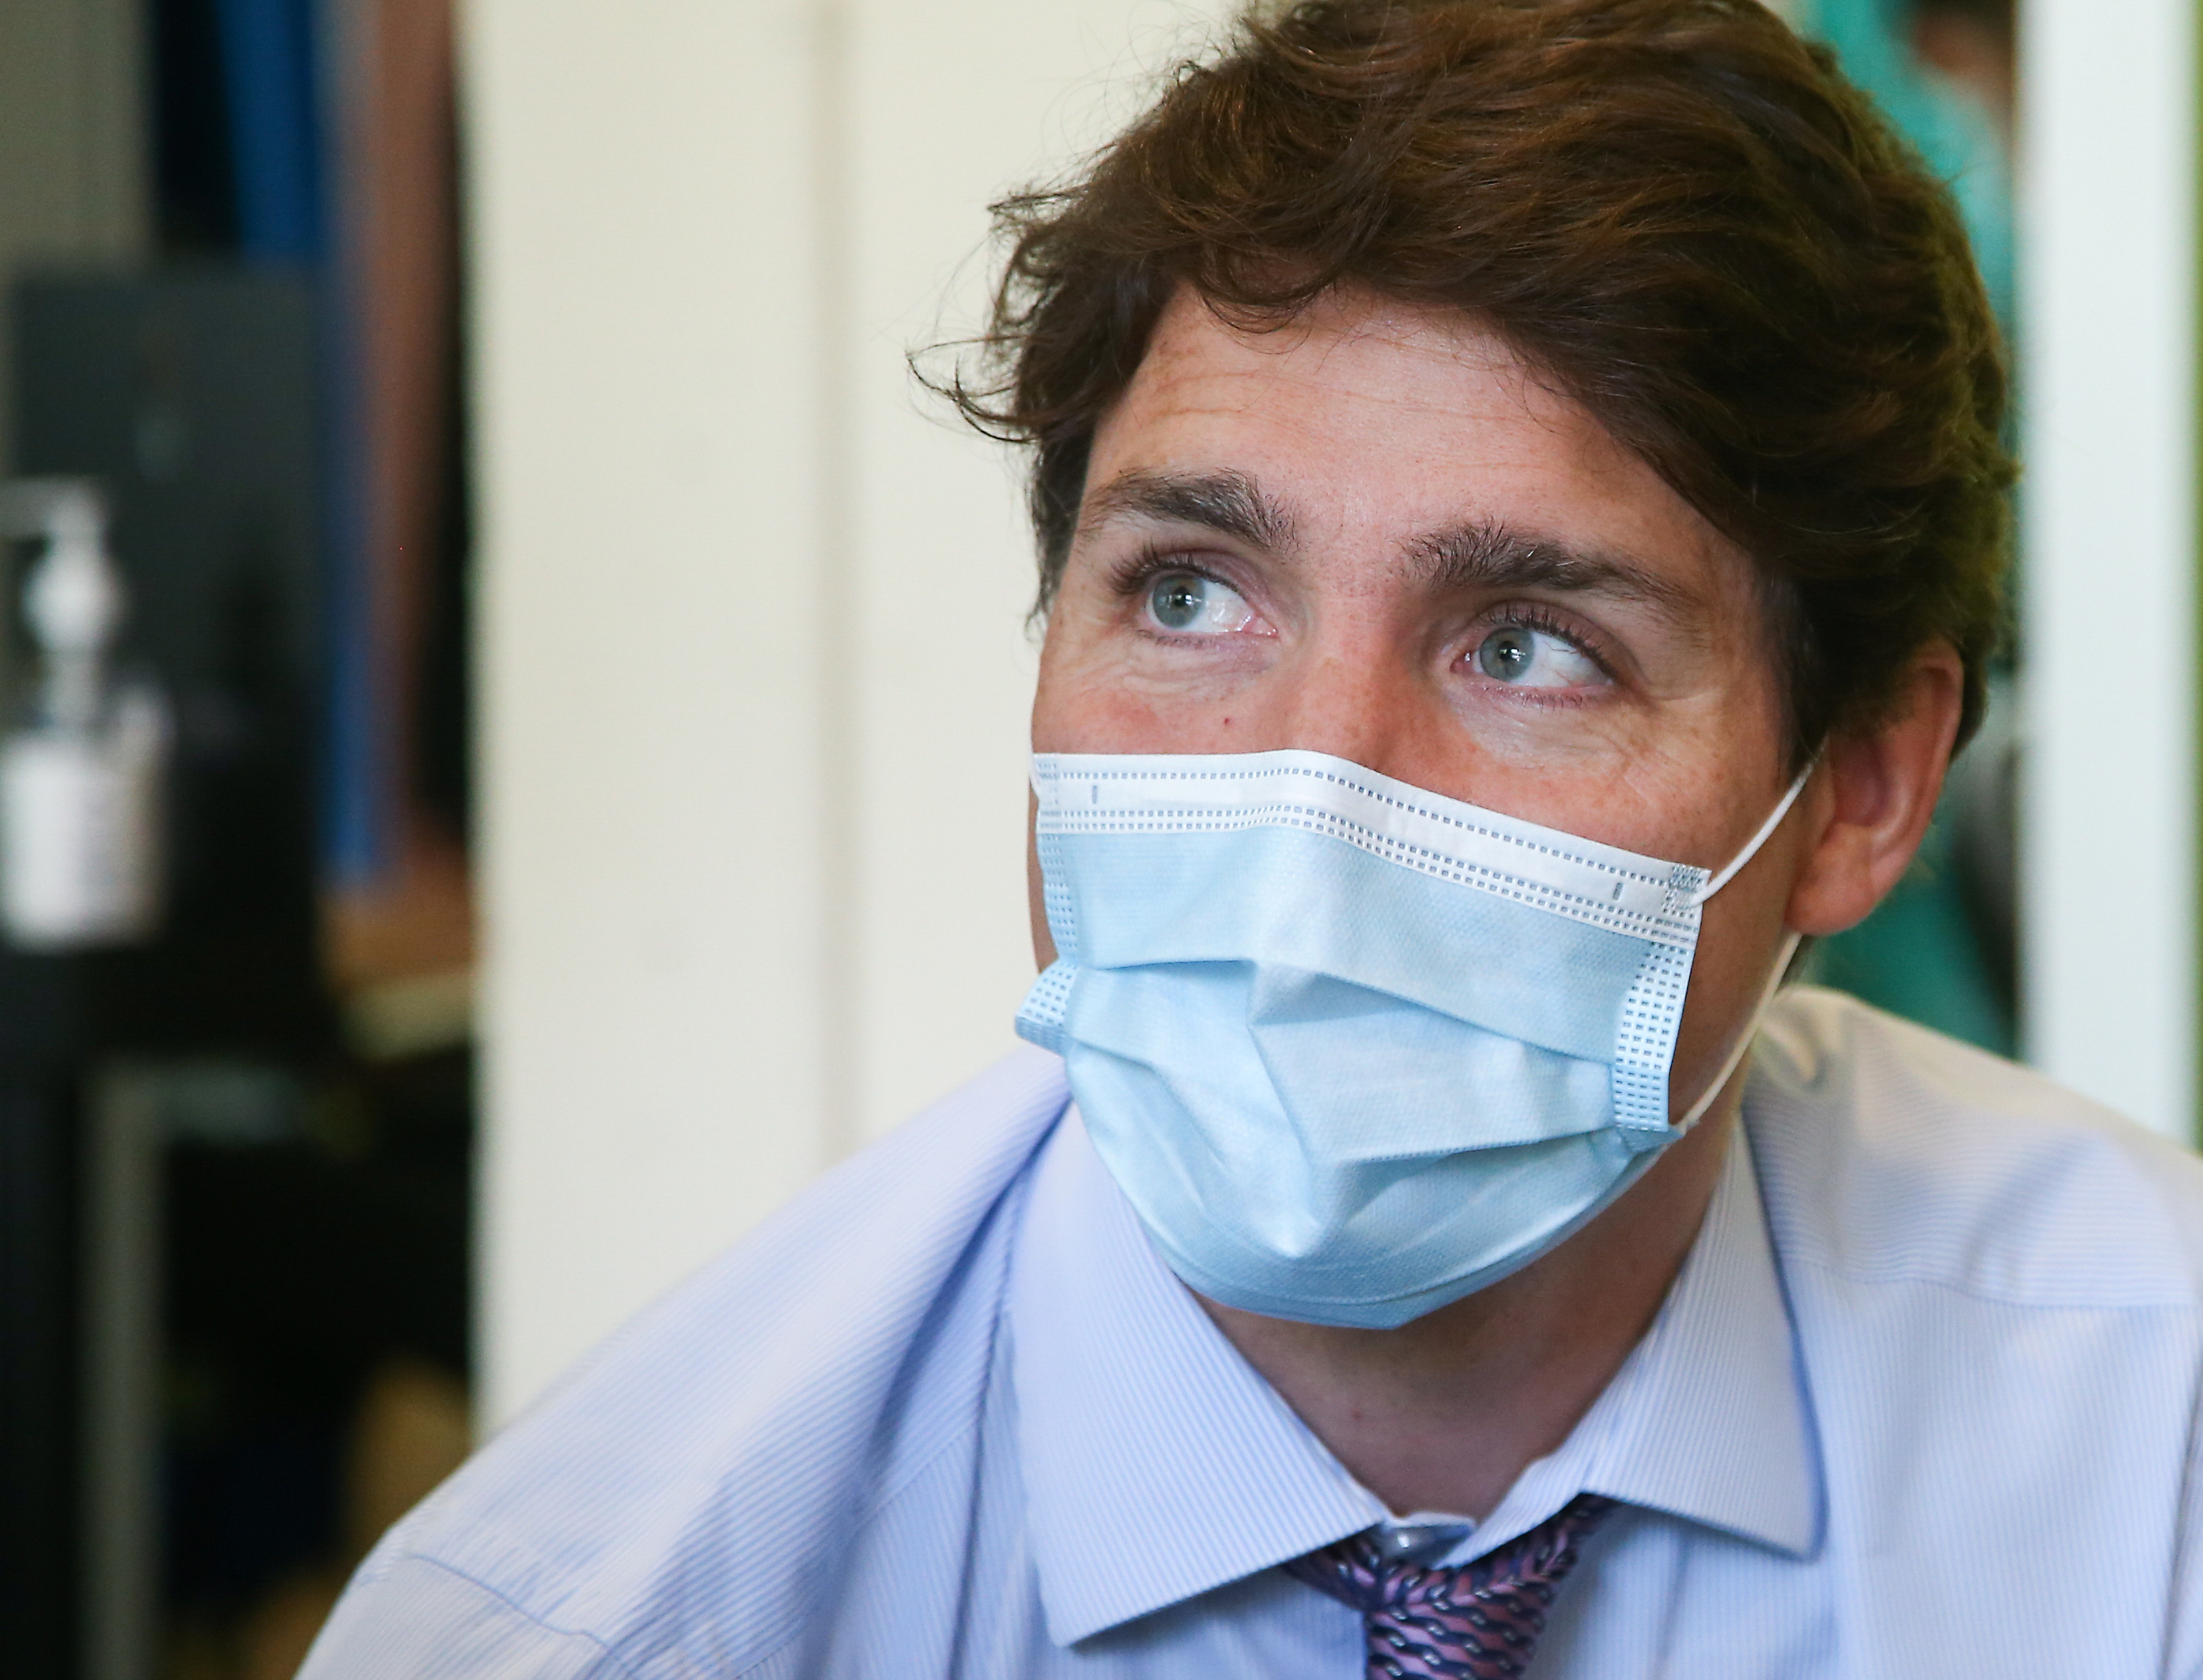 Canada's Prime Minister Trudeau visits a vaccination site in Montreal